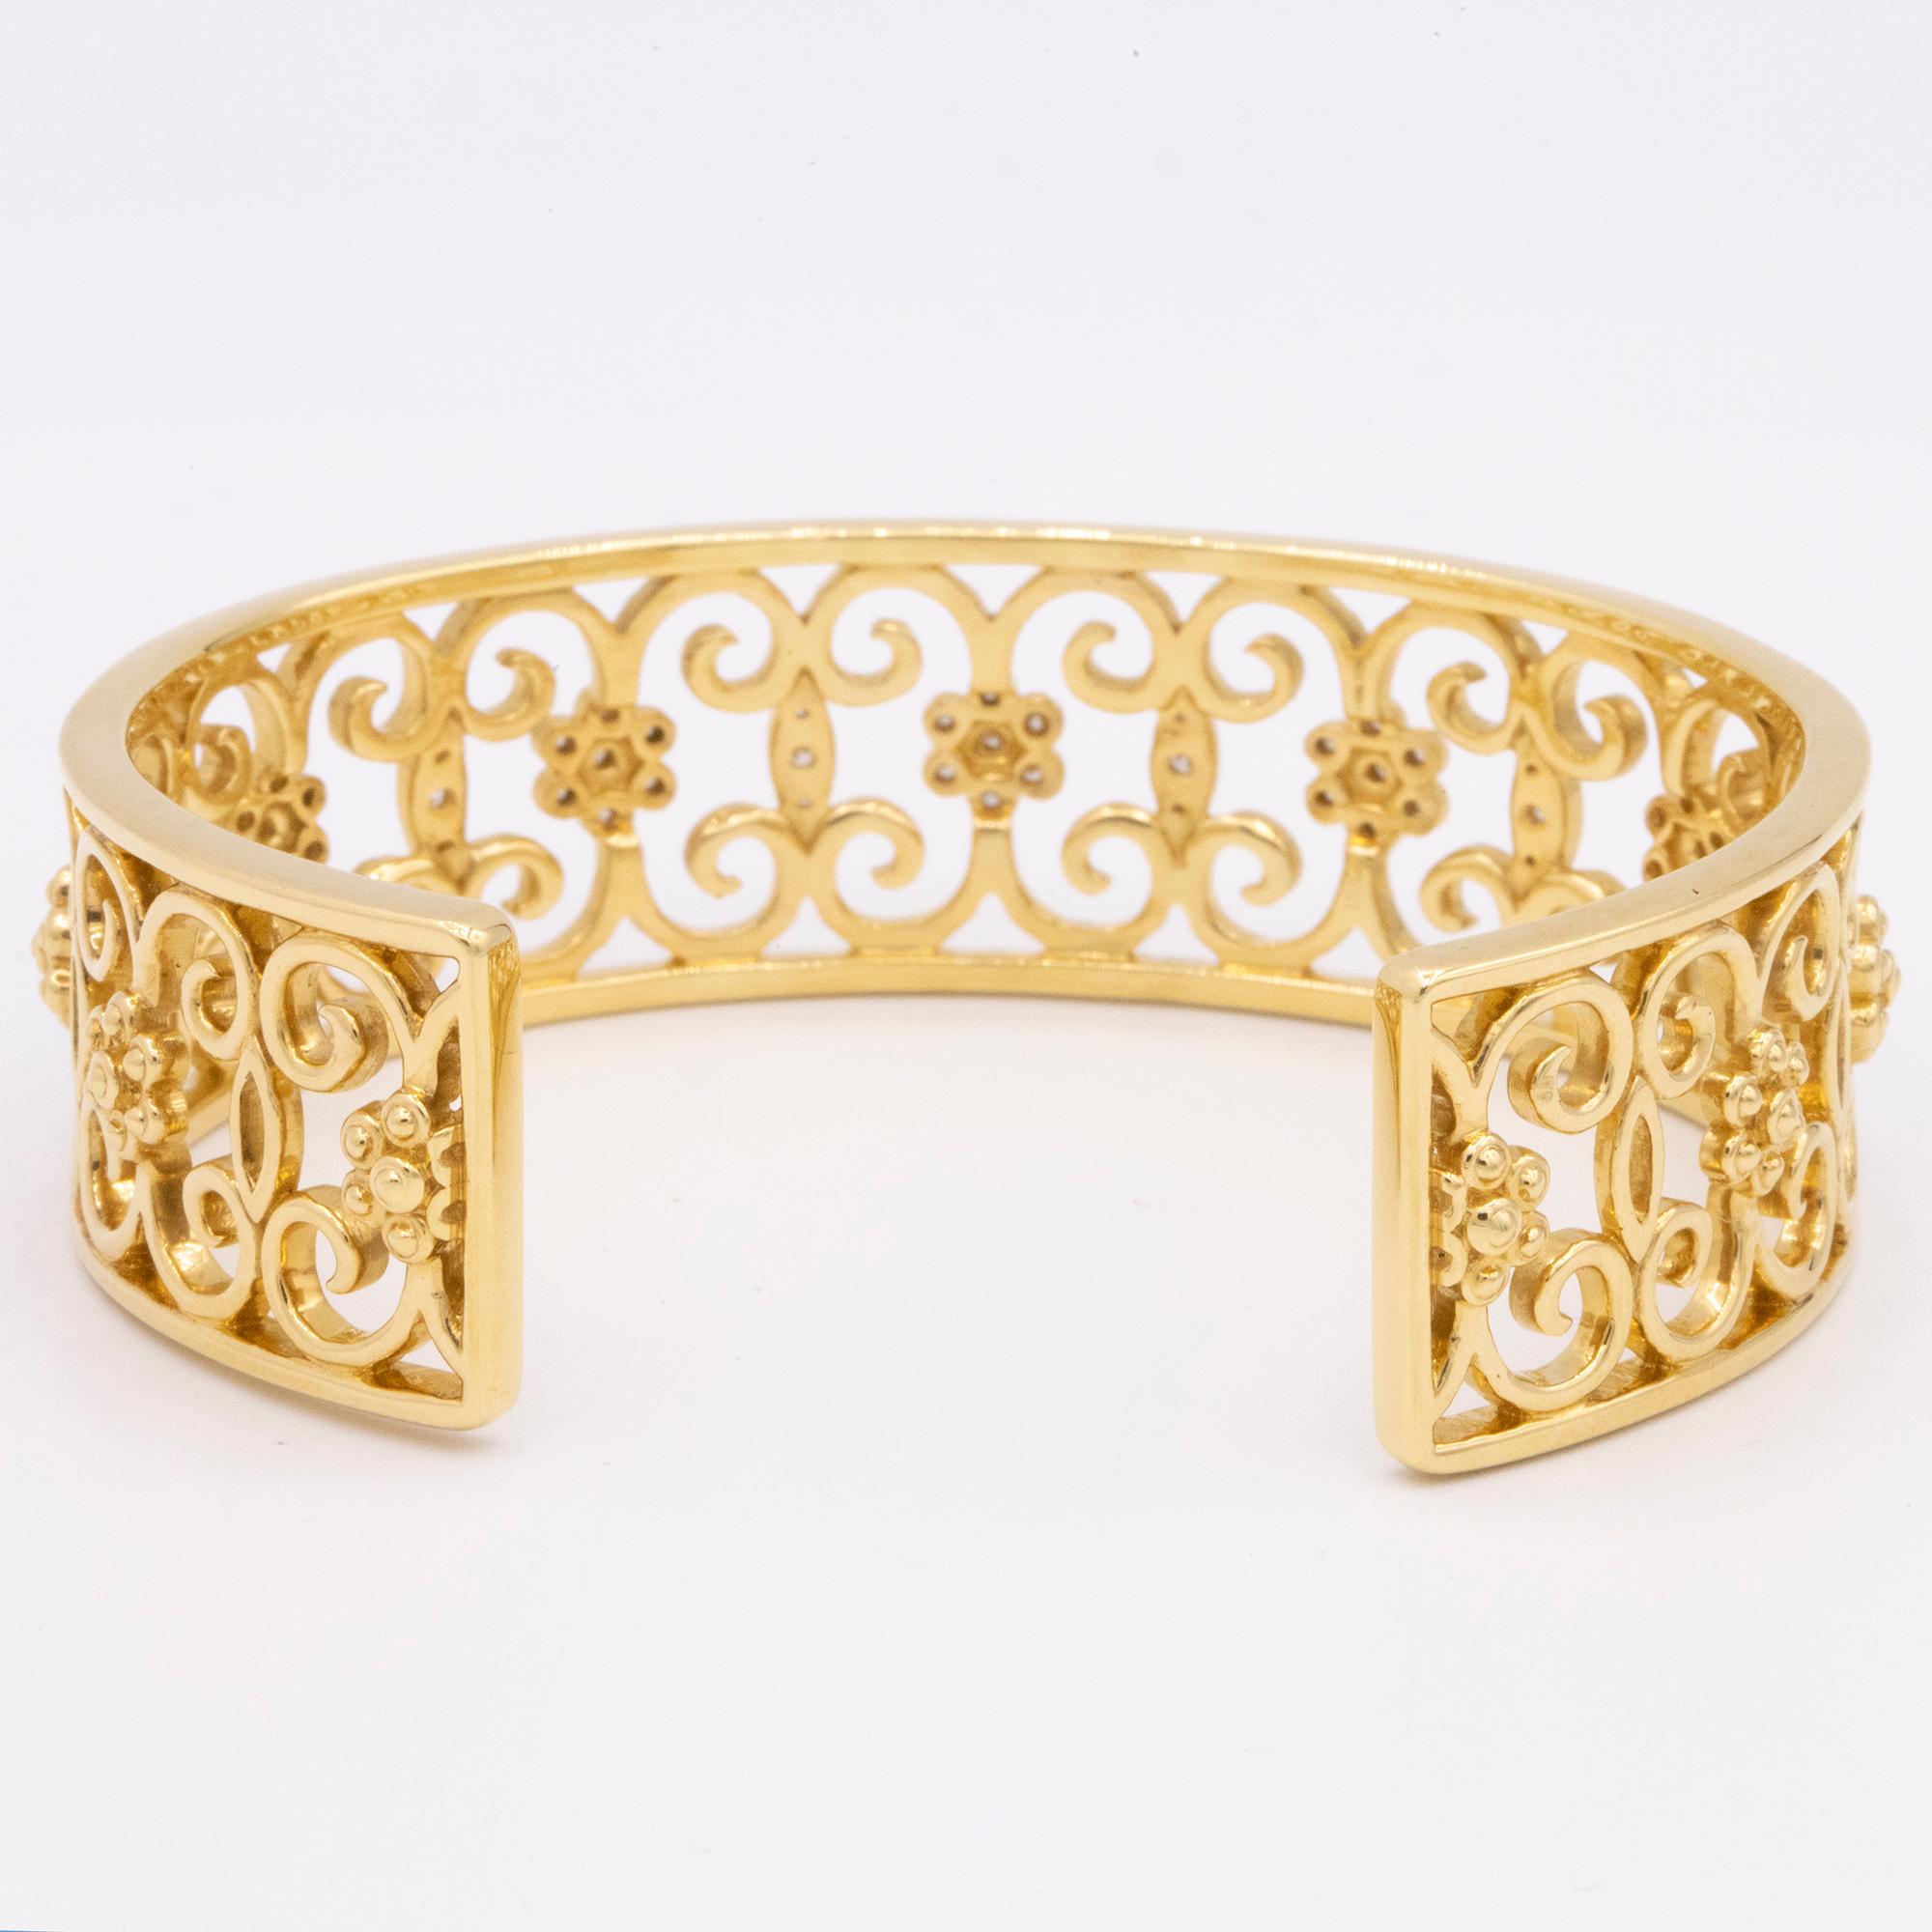 From Hamilton's Arabesque Collection, 18k yellow gold openwork cuff bracelet with 53 round brilliant diamonds, weighing .34ctw. This cuff is 17mm wide. 